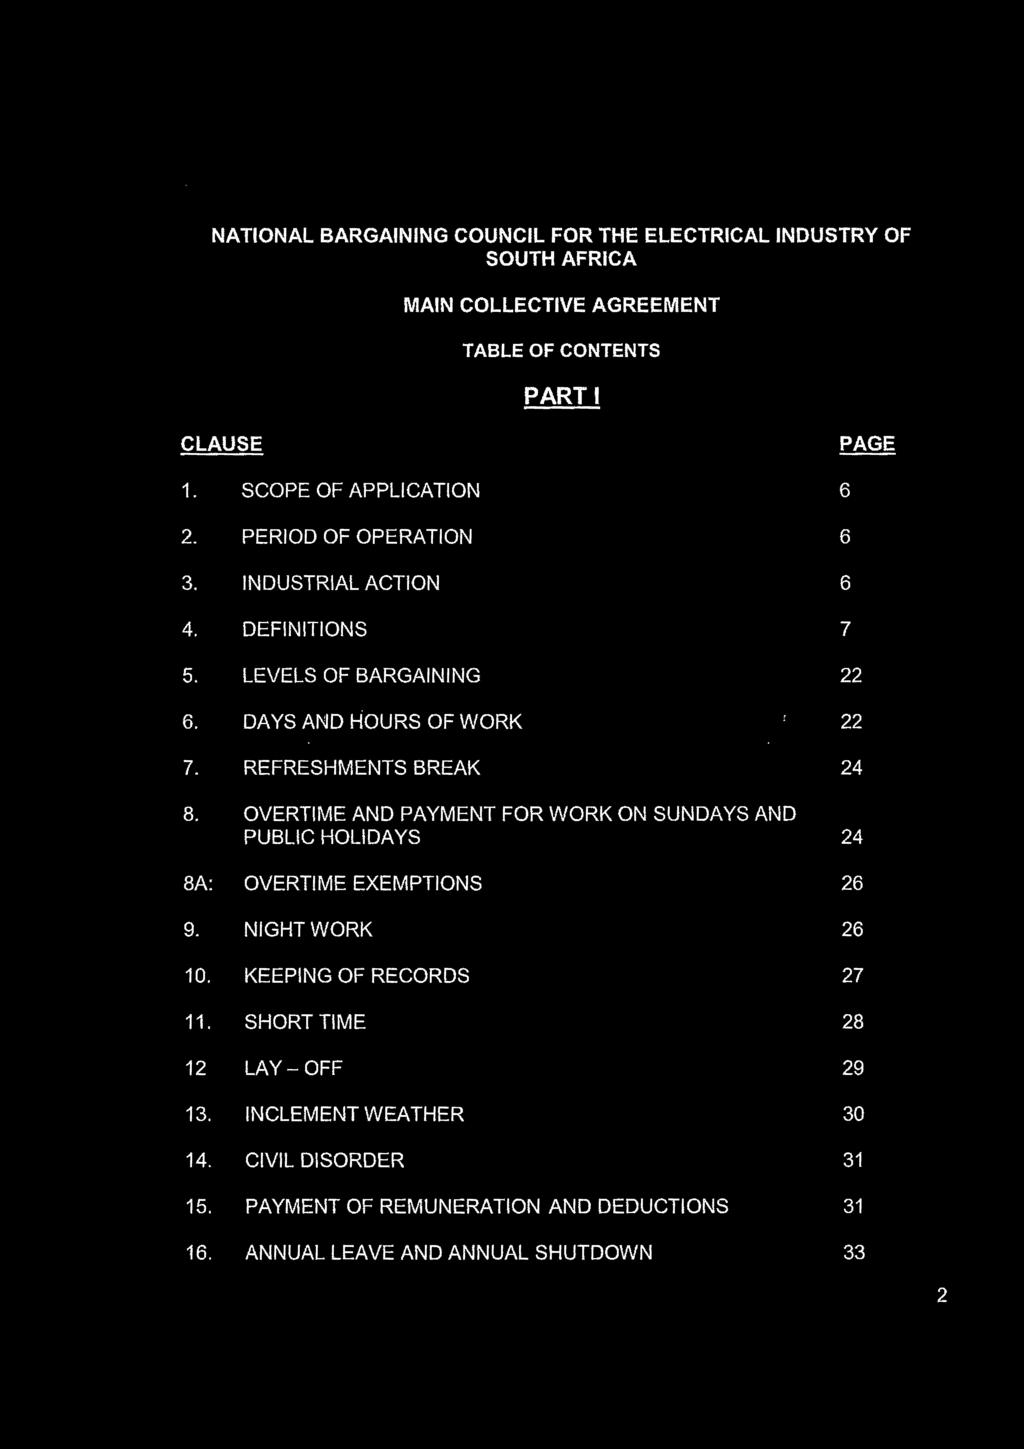 34 No. 40713 GOVERNMENT GAZETTE, 24 MARCH 2017 NATIONAL BARGAINING COUNCIL FOR THE ELECTRICAL INDUSTRY OF SOUTH AFRICA MAIN COLLECTIVE AGREEMENT TABLE OF CONTENTS PART l CLAUSE PAGE 1.